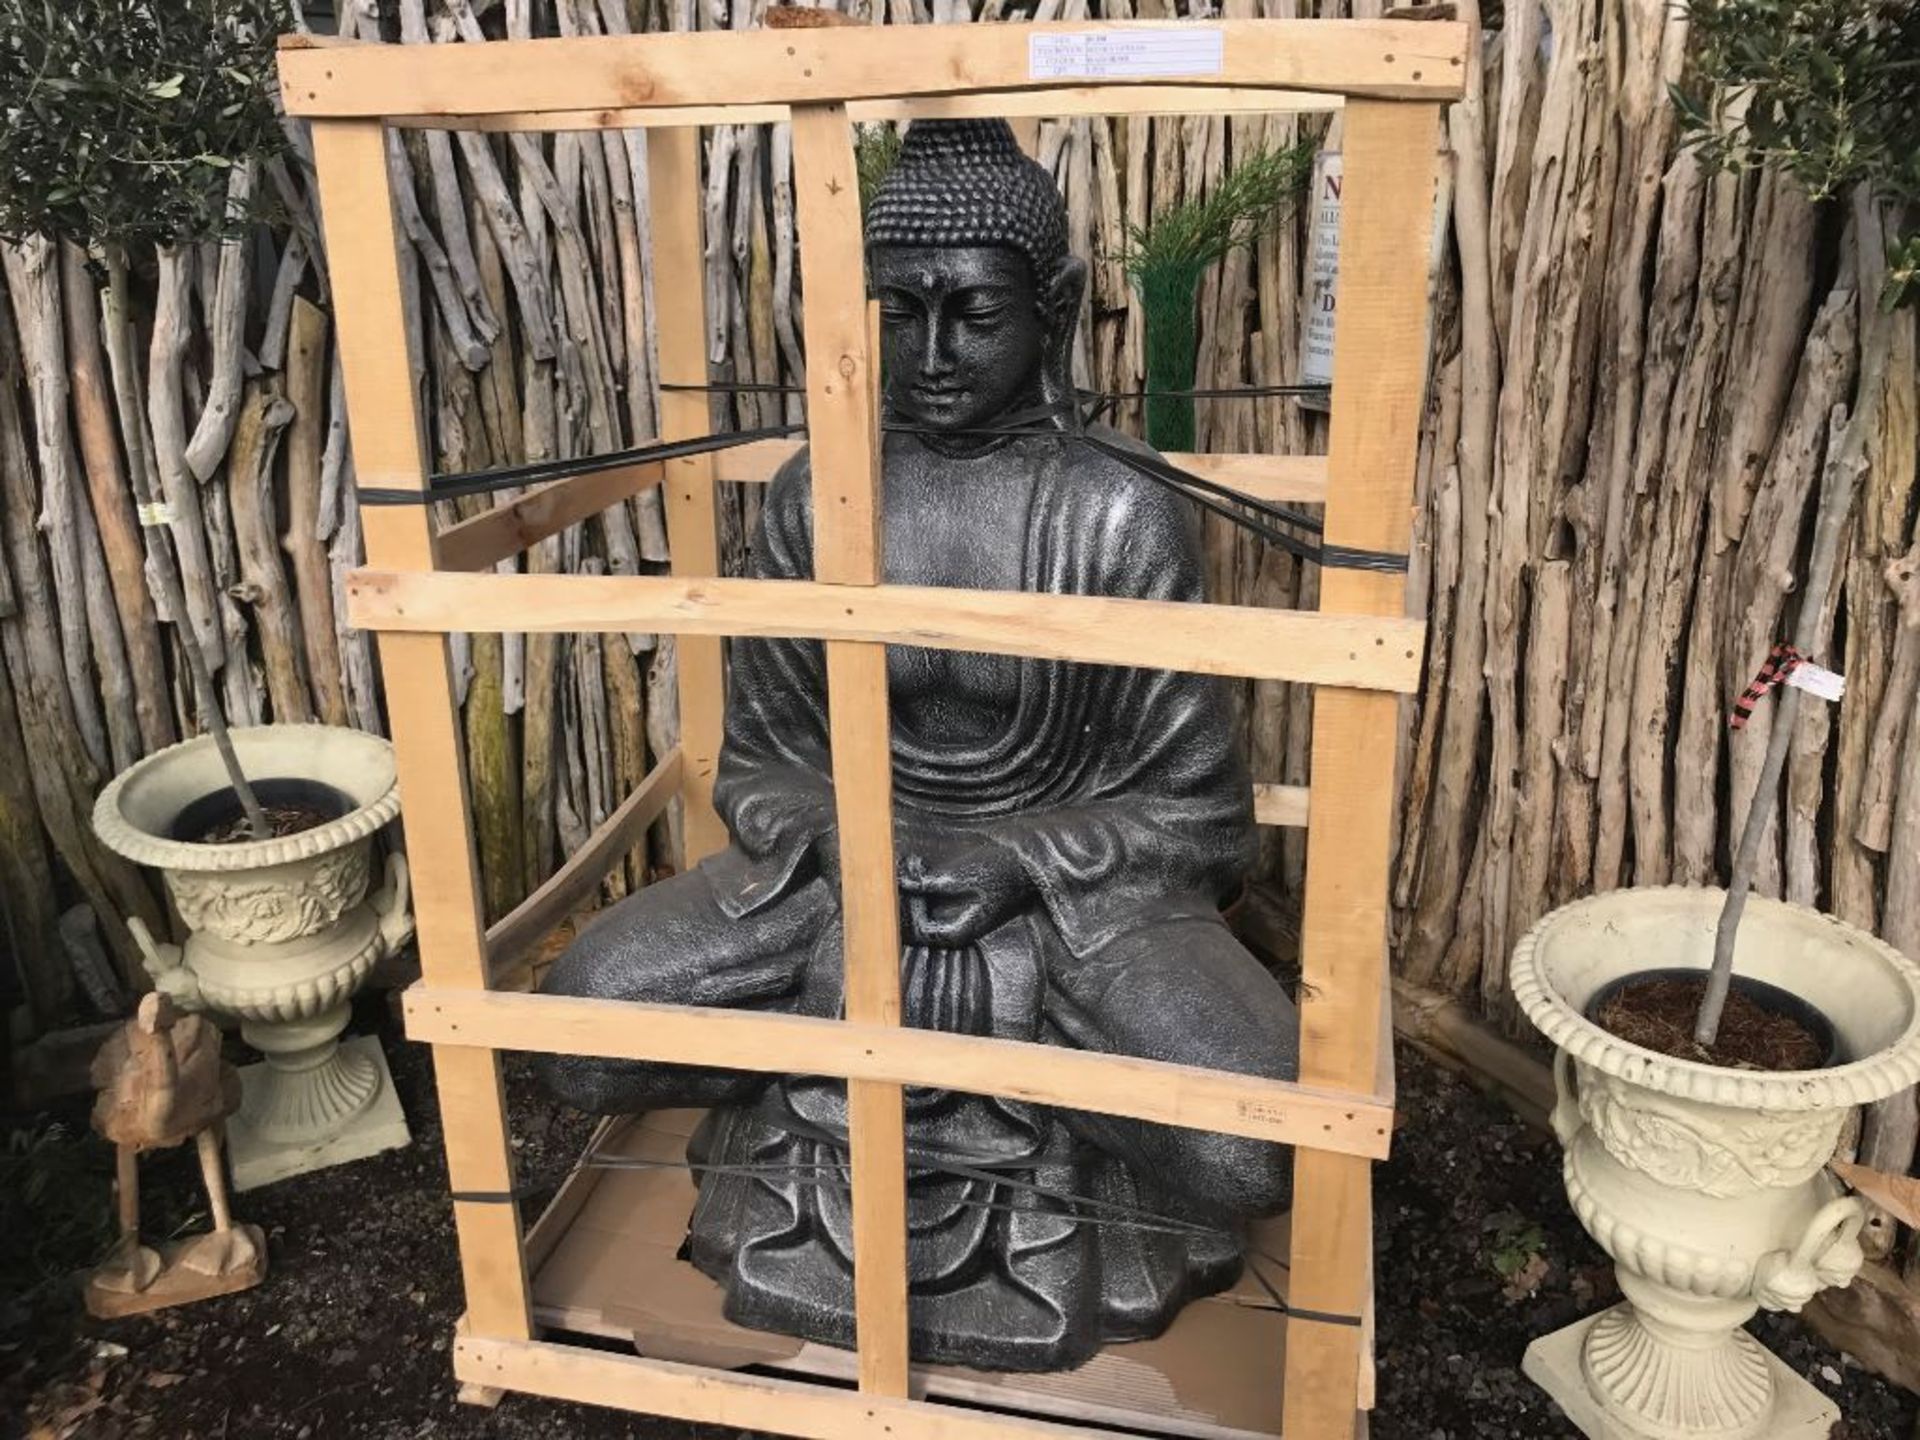 MASSIVE CRATED BUDDHA IN SILVER FINISH ON PALLET